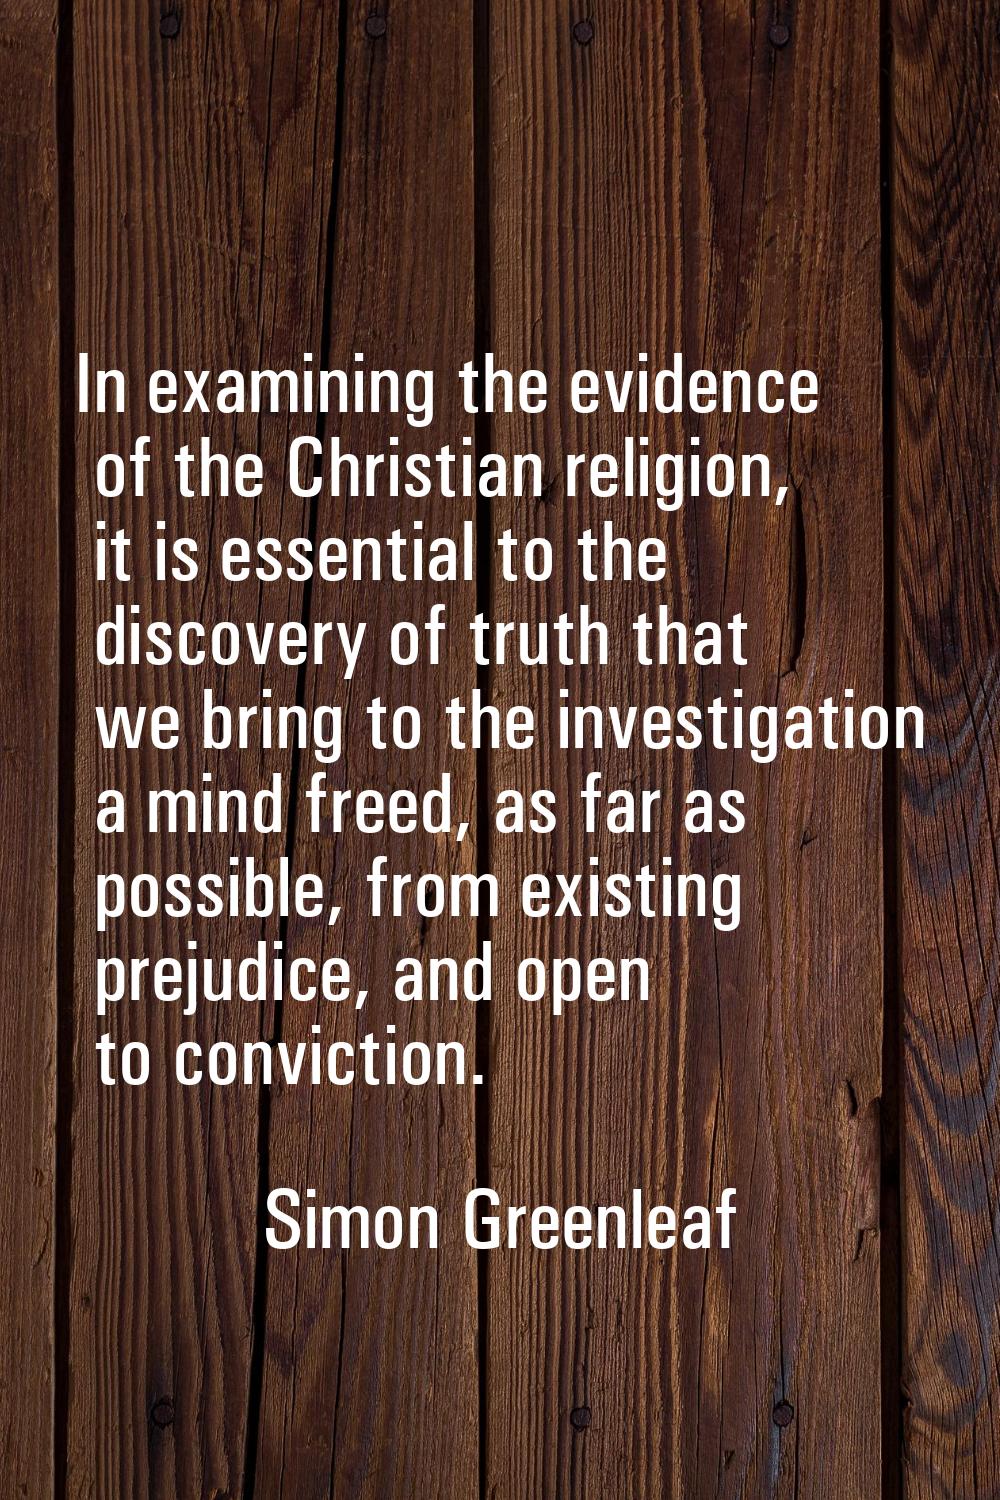 In examining the evidence of the Christian religion, it is essential to the discovery of truth that